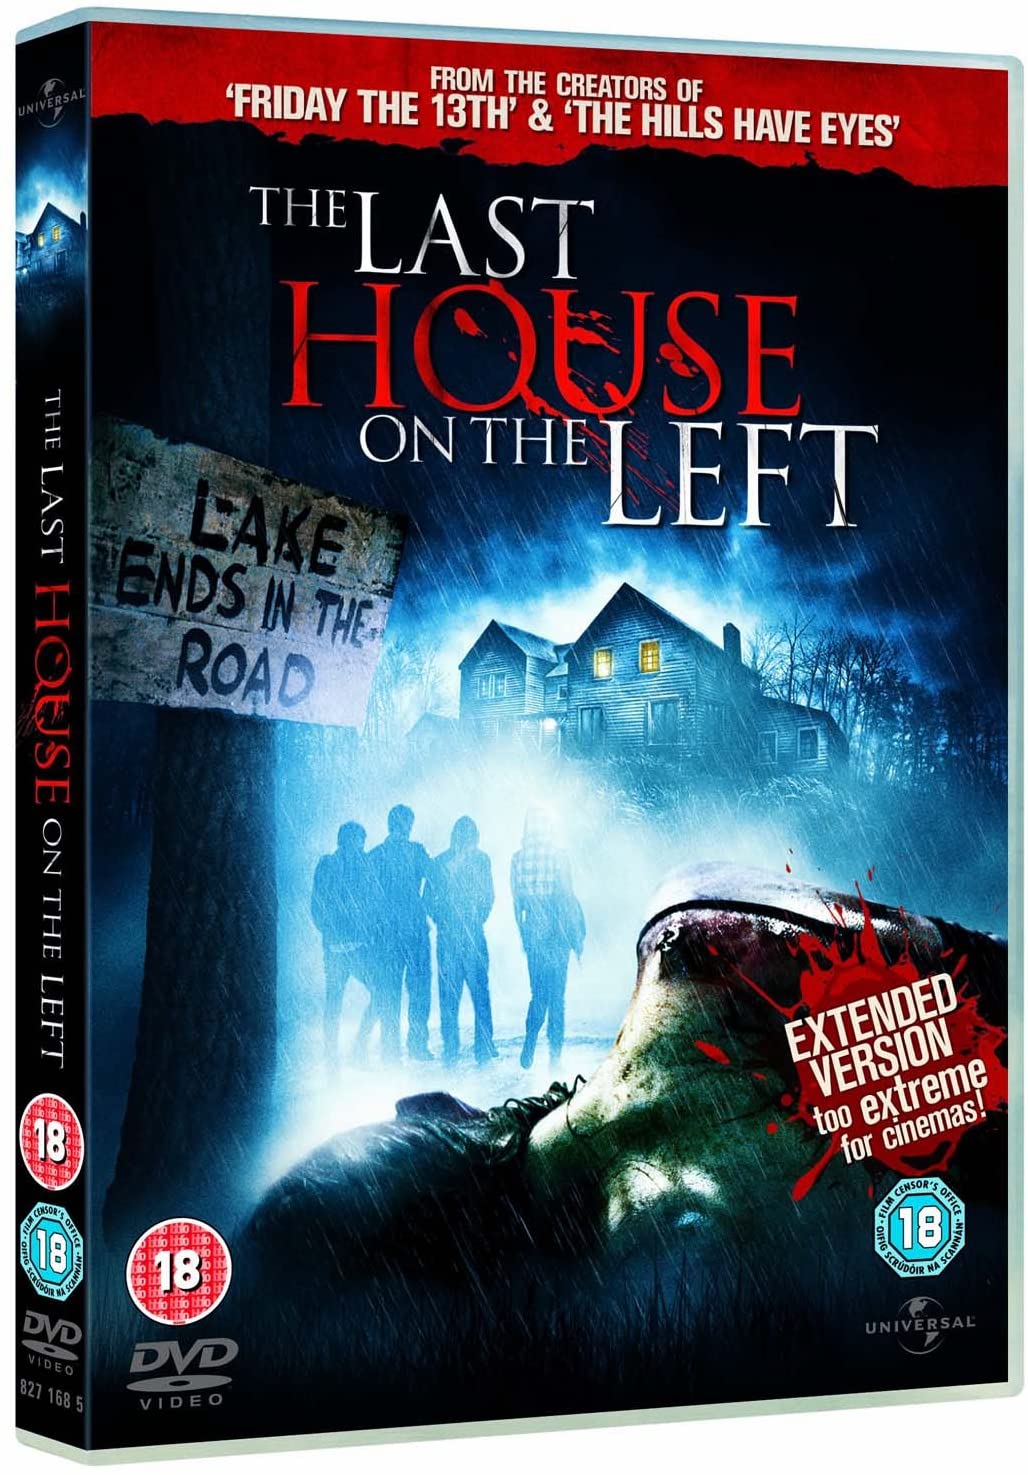 The Last House On The Left: Extended Version [DVD]